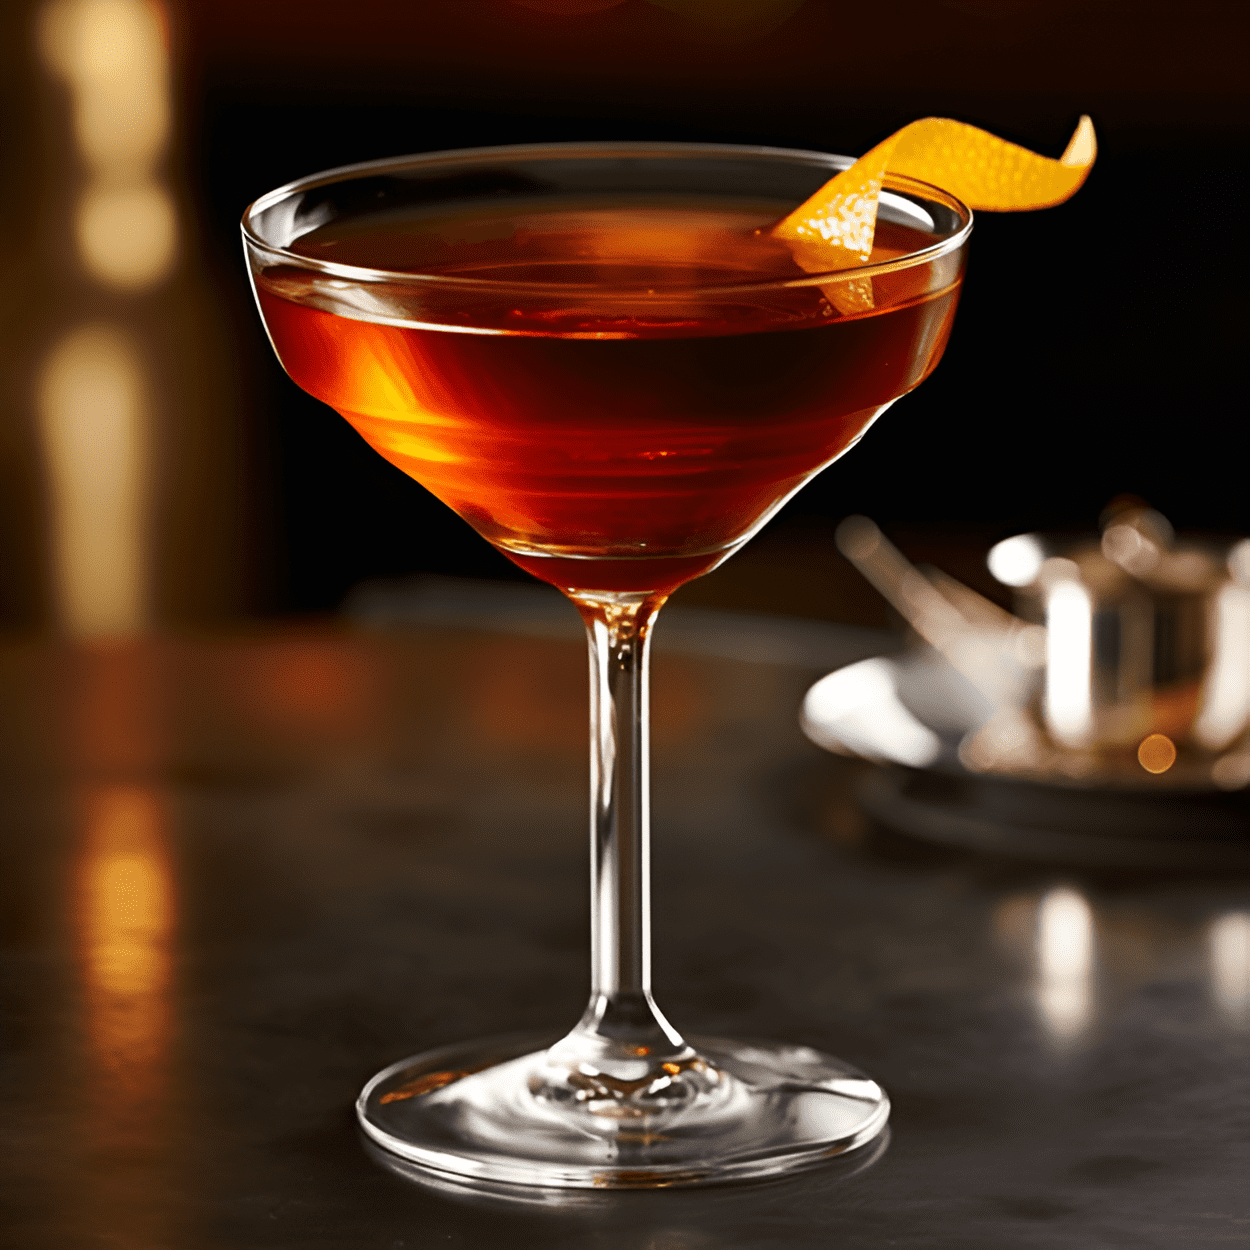 Makers Manhattan Cocktail Recipe - The Makers Manhattan is a robust and full-bodied cocktail. It's sweet, but not overly so, with a strong bourbon flavor that's balanced by the bitterness of the vermouth. The cherry and orange garnish add a hint of fruitiness, while the bitters give it a complex, layered taste.